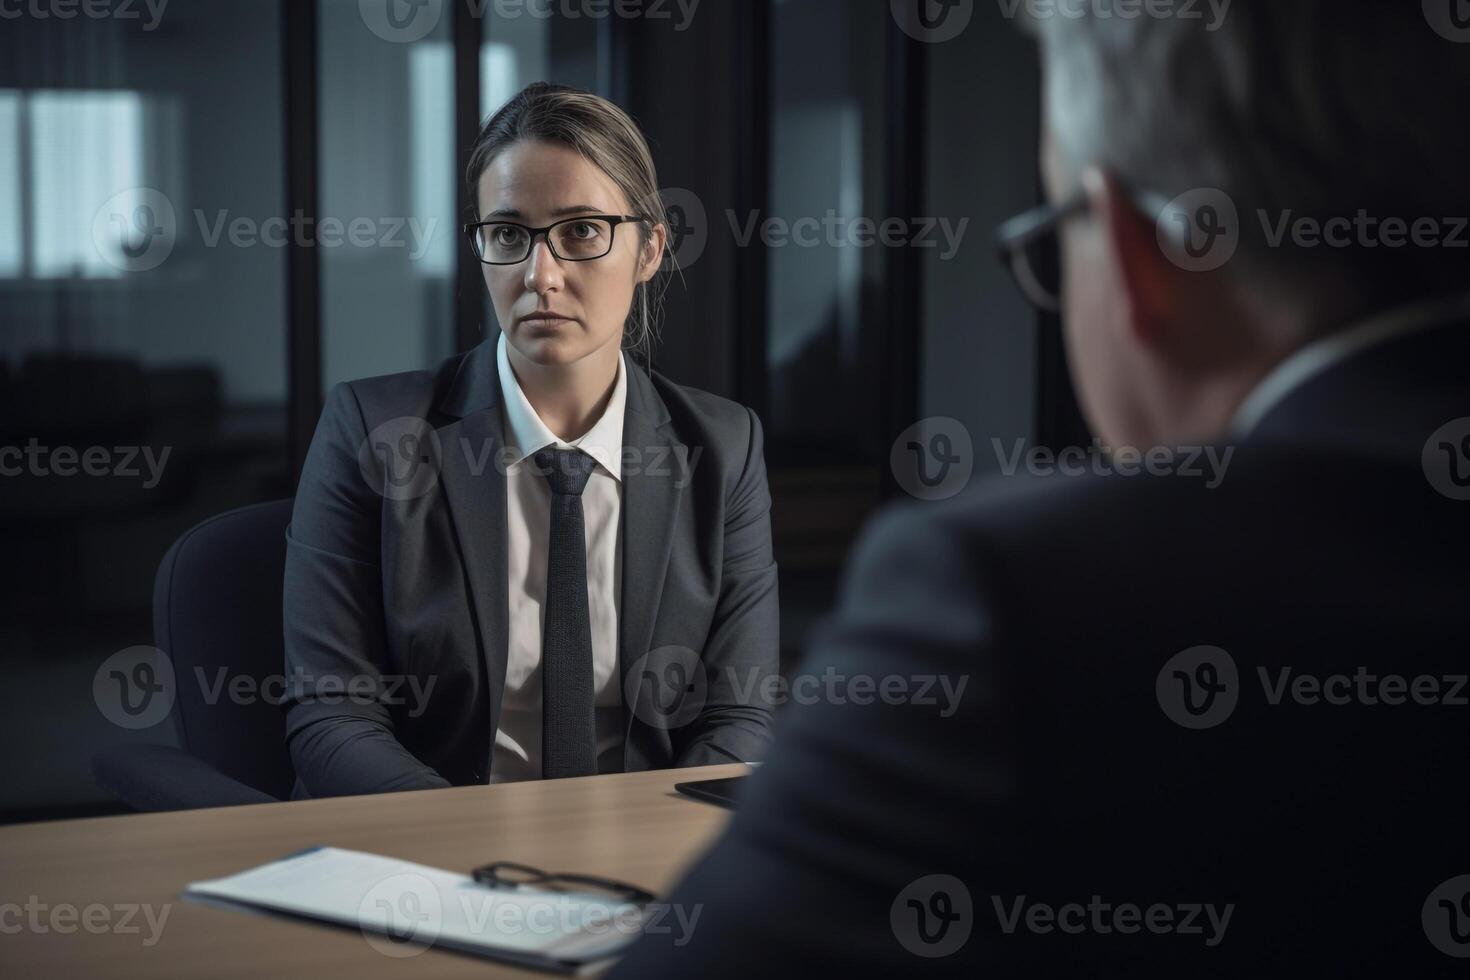 Job interview scene of job recruitment photo realism created with AI tools